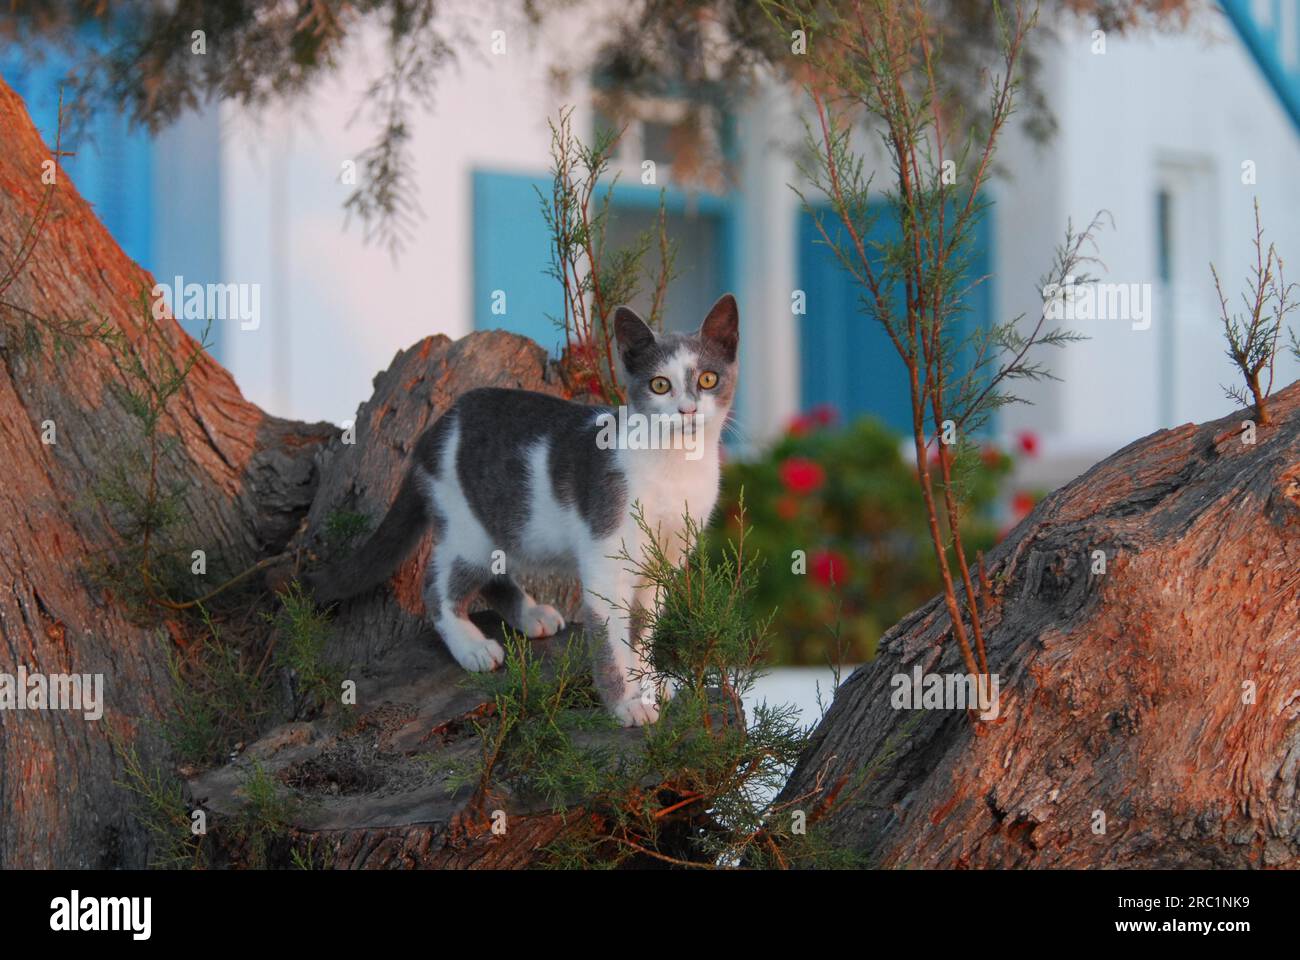 Domestic cat, Tortie and White, standing on an old Tamarix tree in a greek alleyway in the evening light, Cyclades, Greece Stock Photo